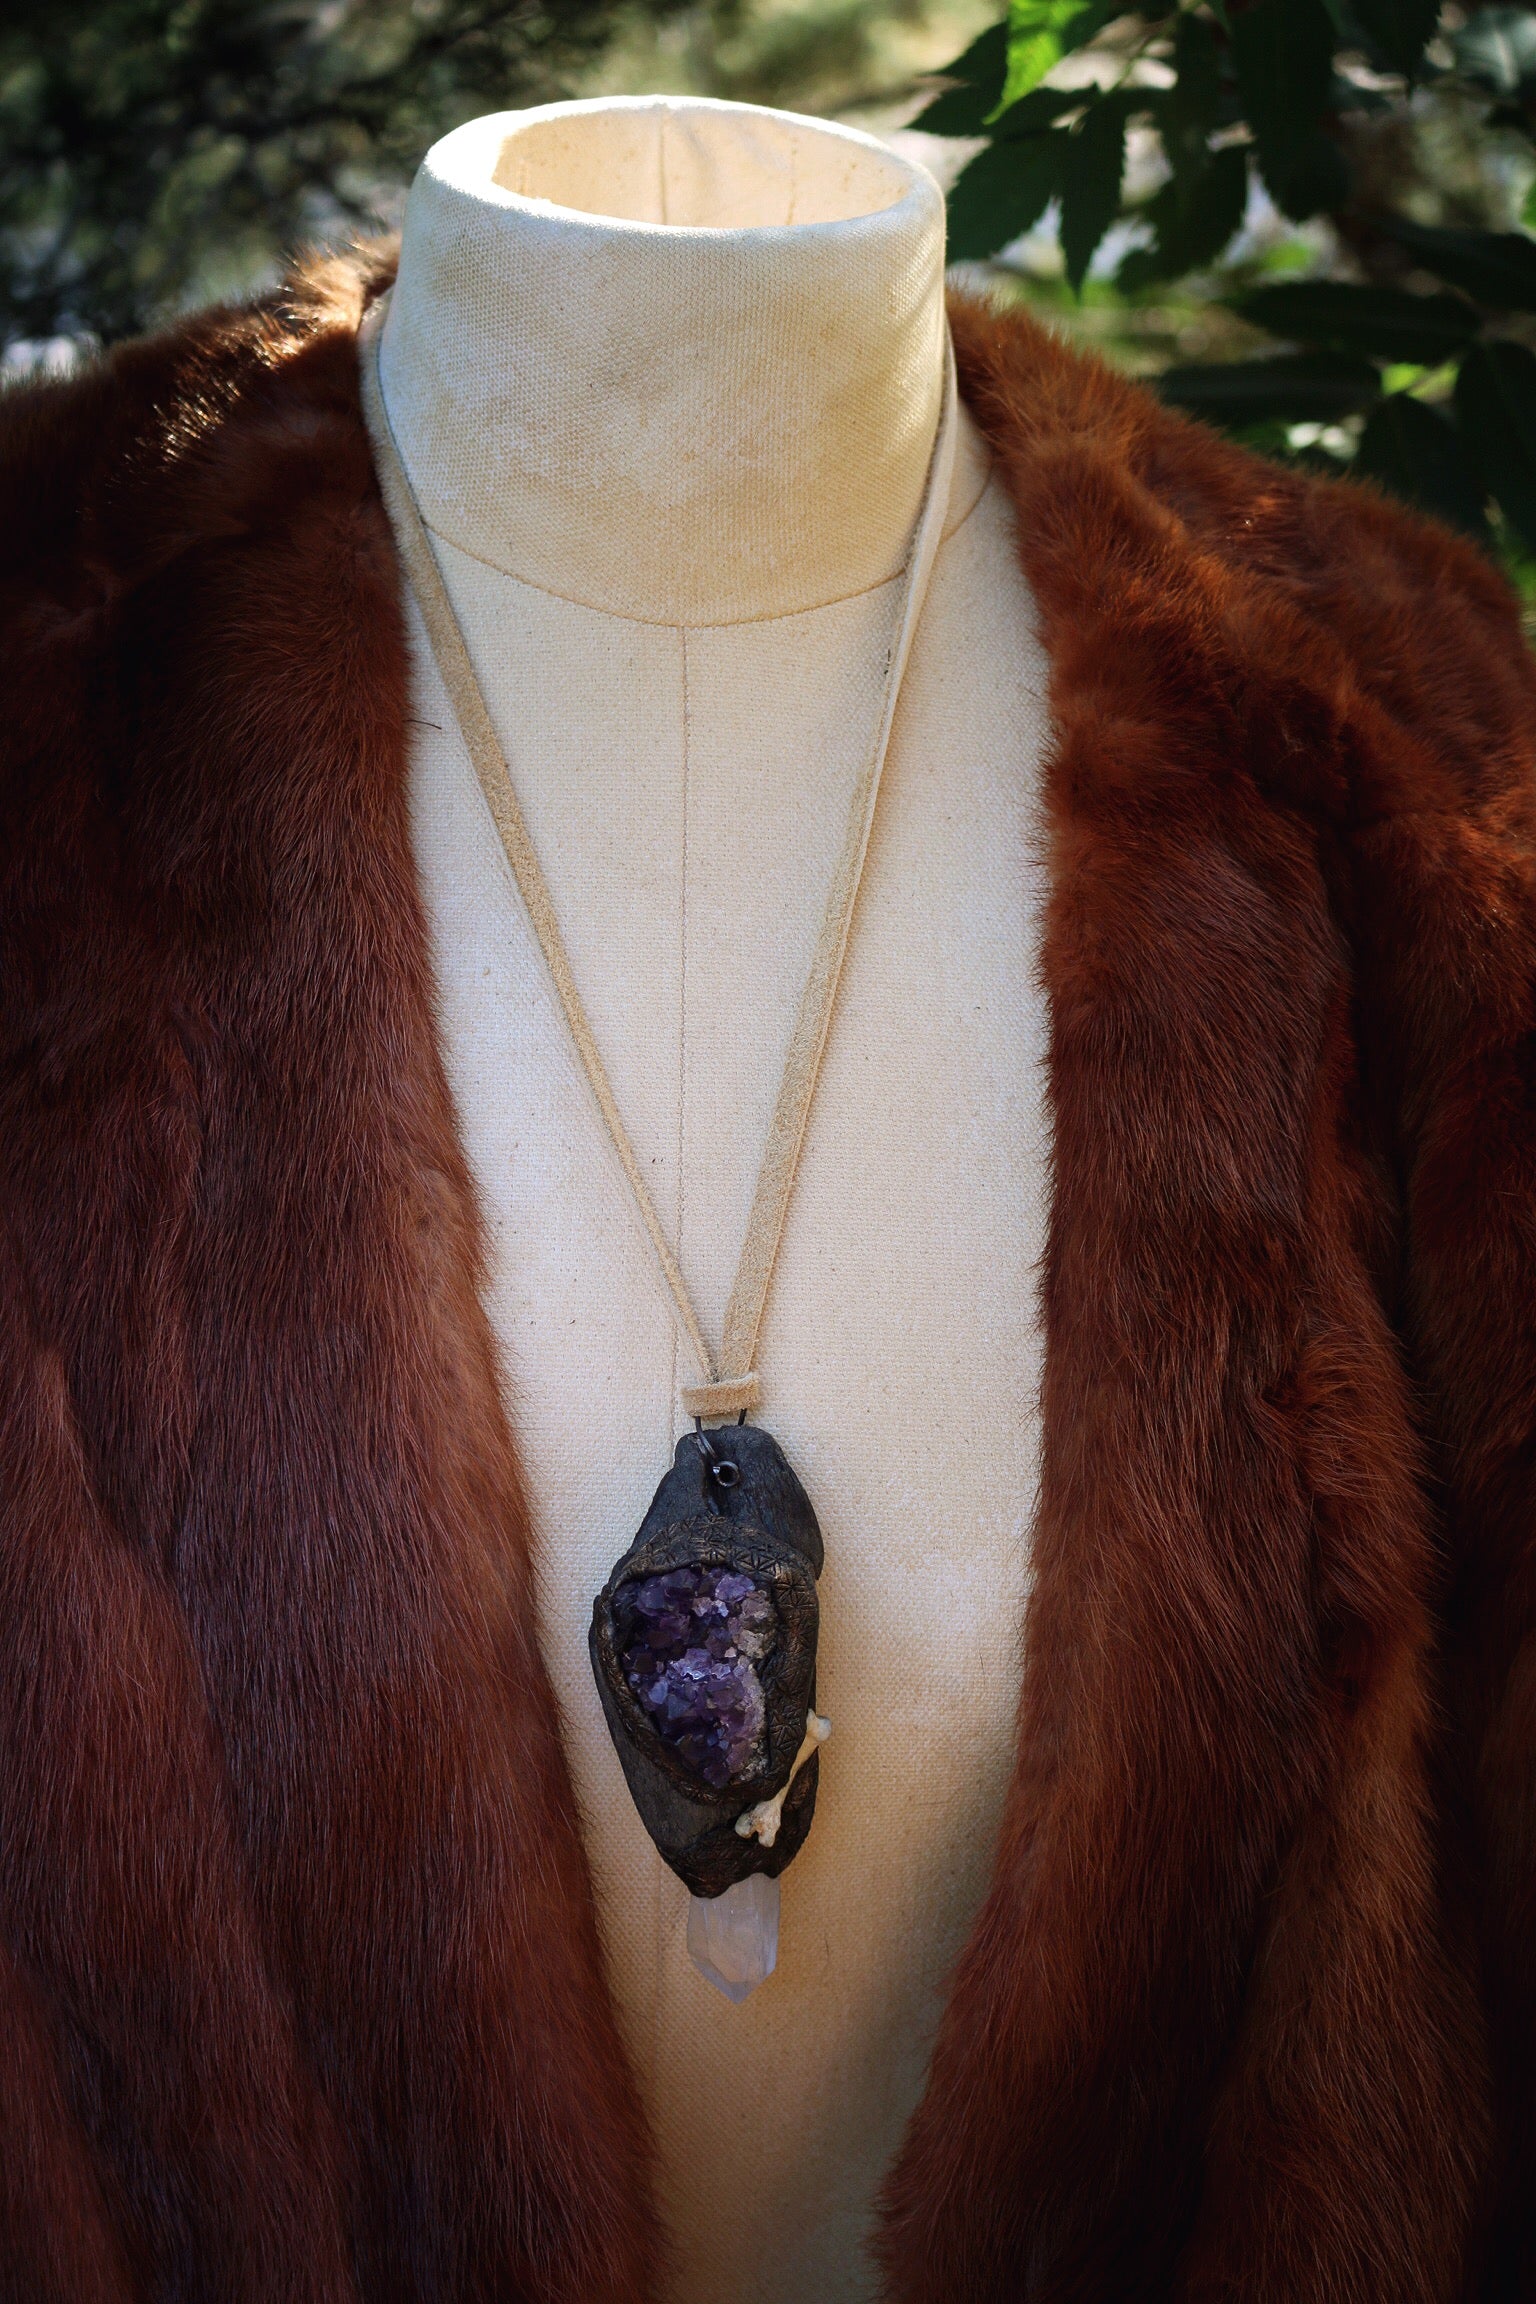 Driftwood Necklace with Amethyst, Bone, Quartz Crystal + the Flower of Life